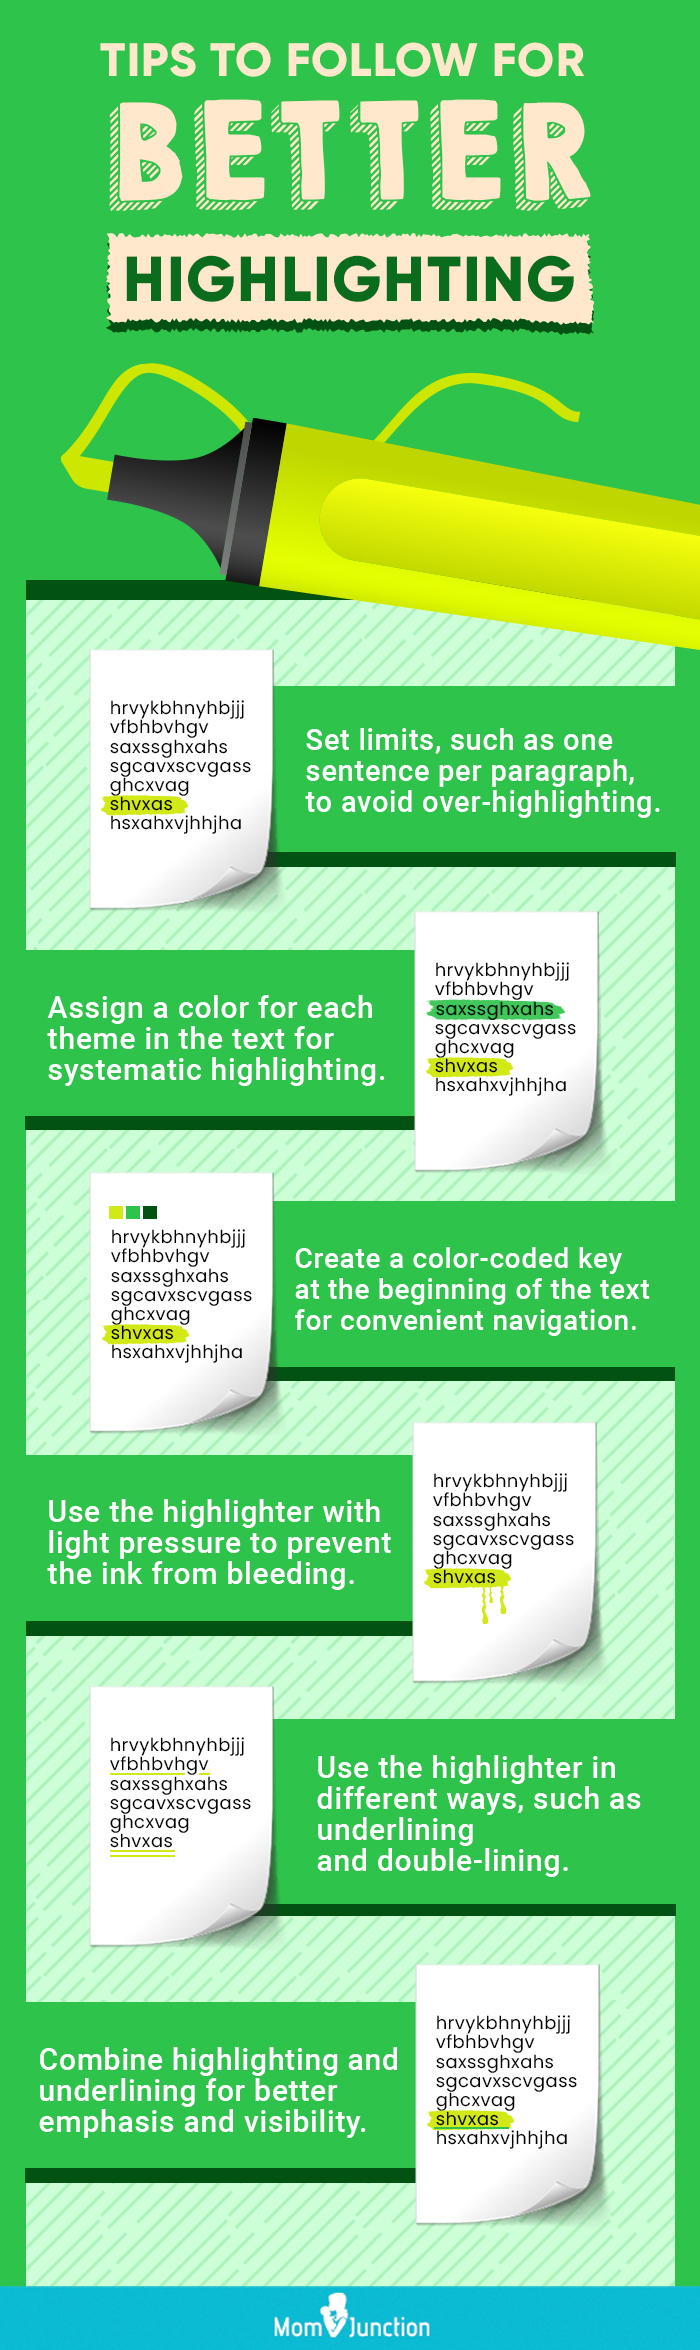 Tips To Follow For Better Highlighting (infographic)